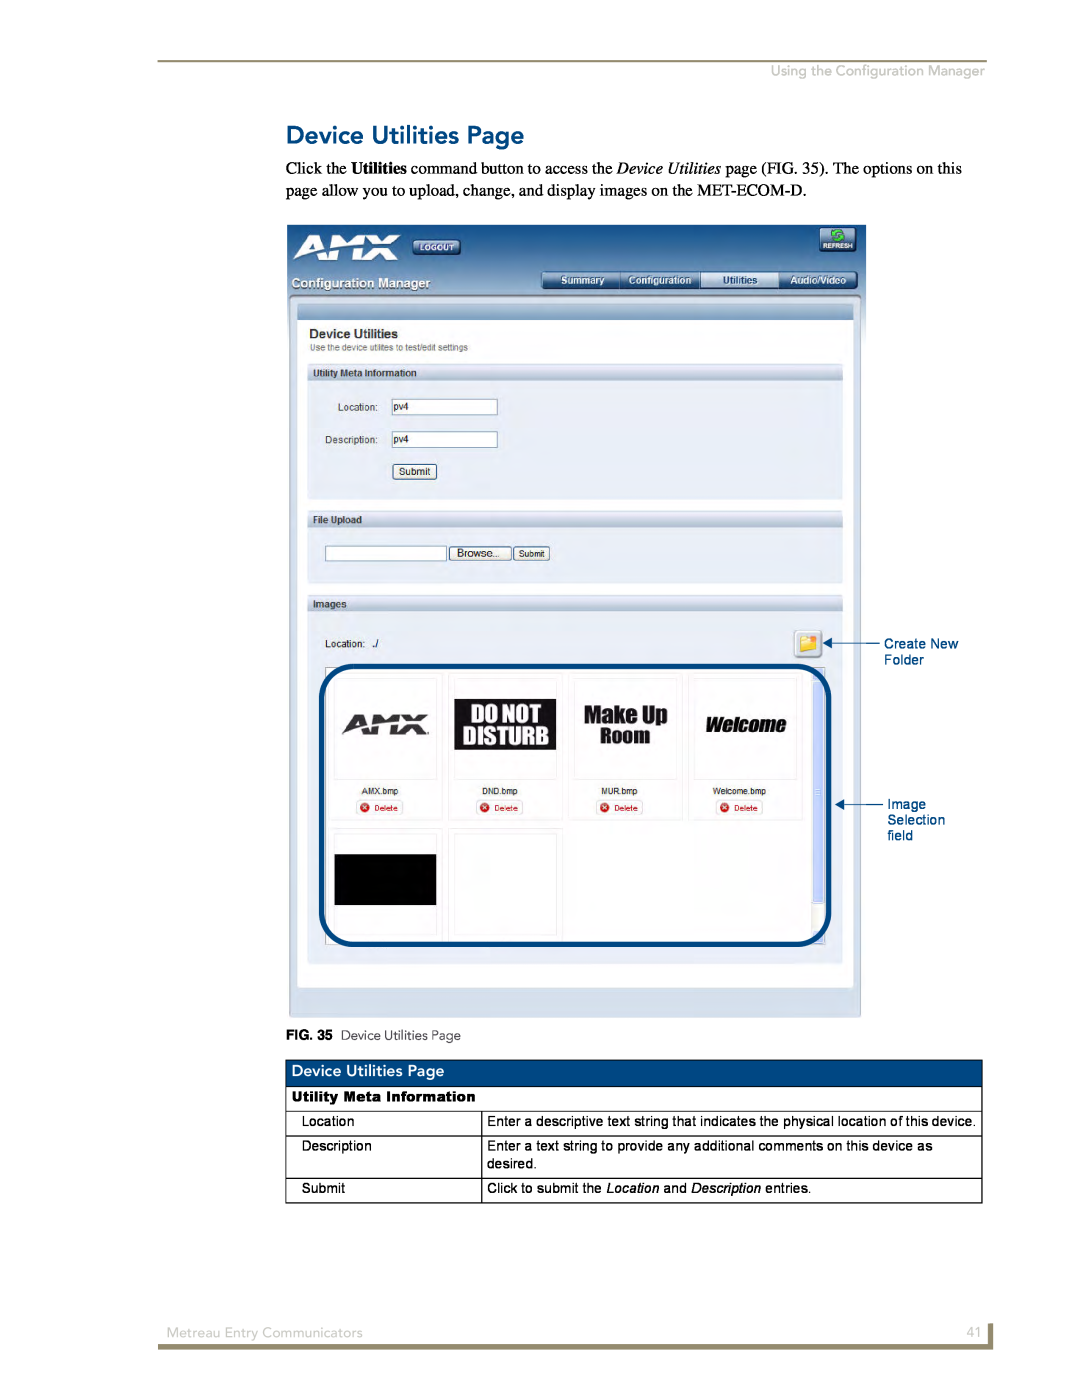 AMX MET-ECOM-D manual Device Utilities Page, Using the Configuration Manager, Create New Folder Image Selection field 